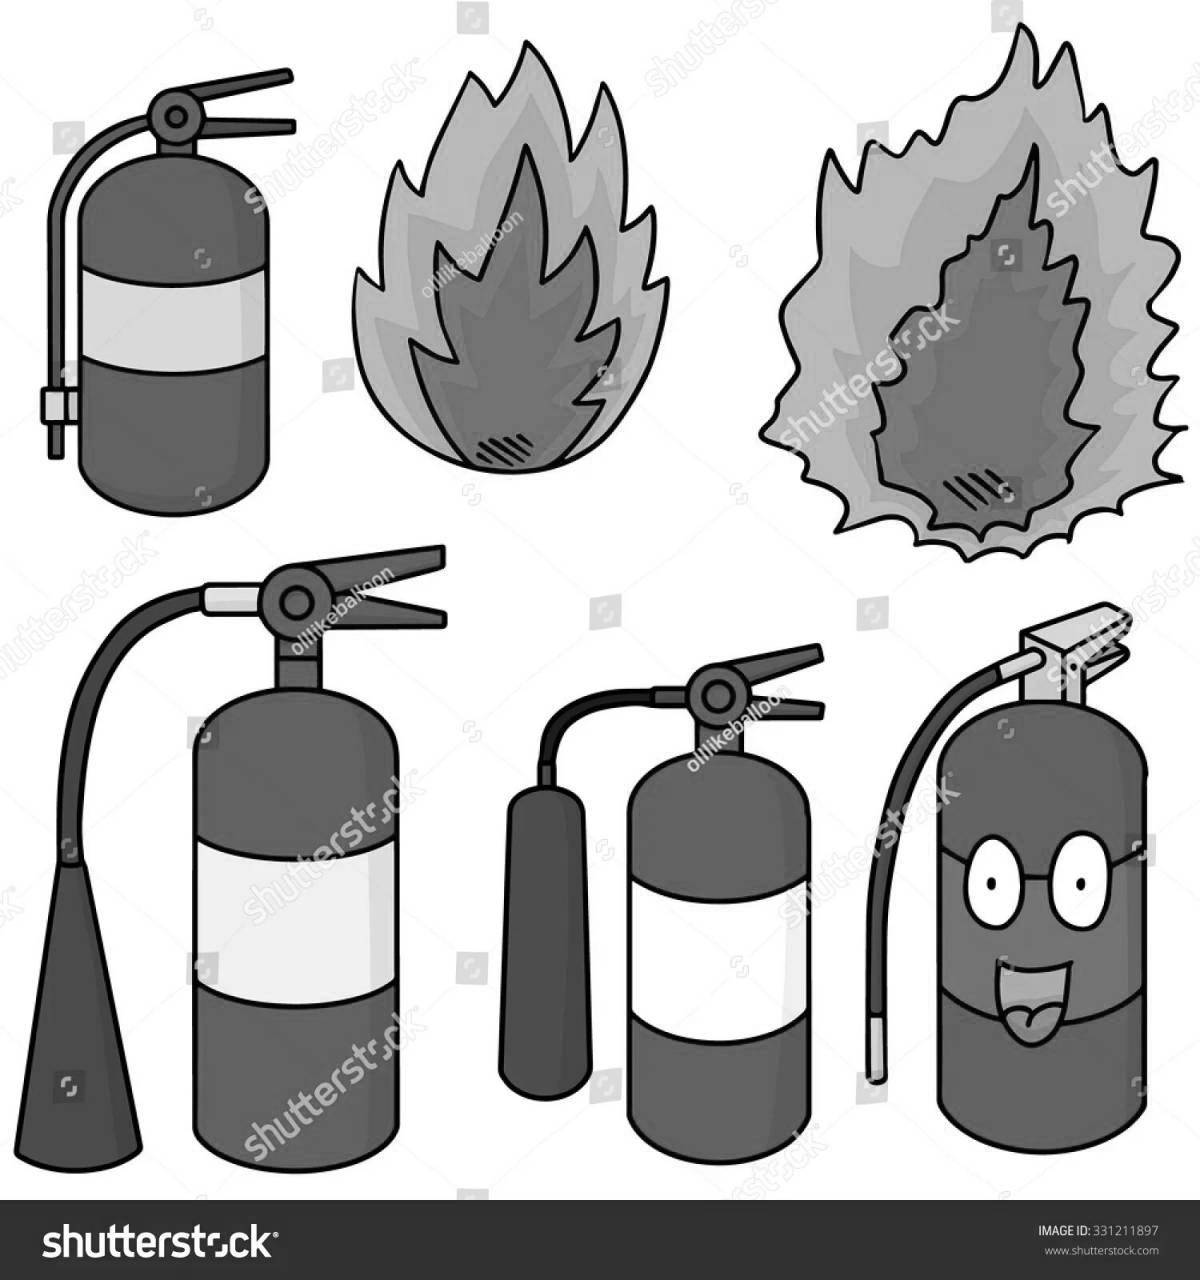 Exciting pre-k fire extinguisher coloring